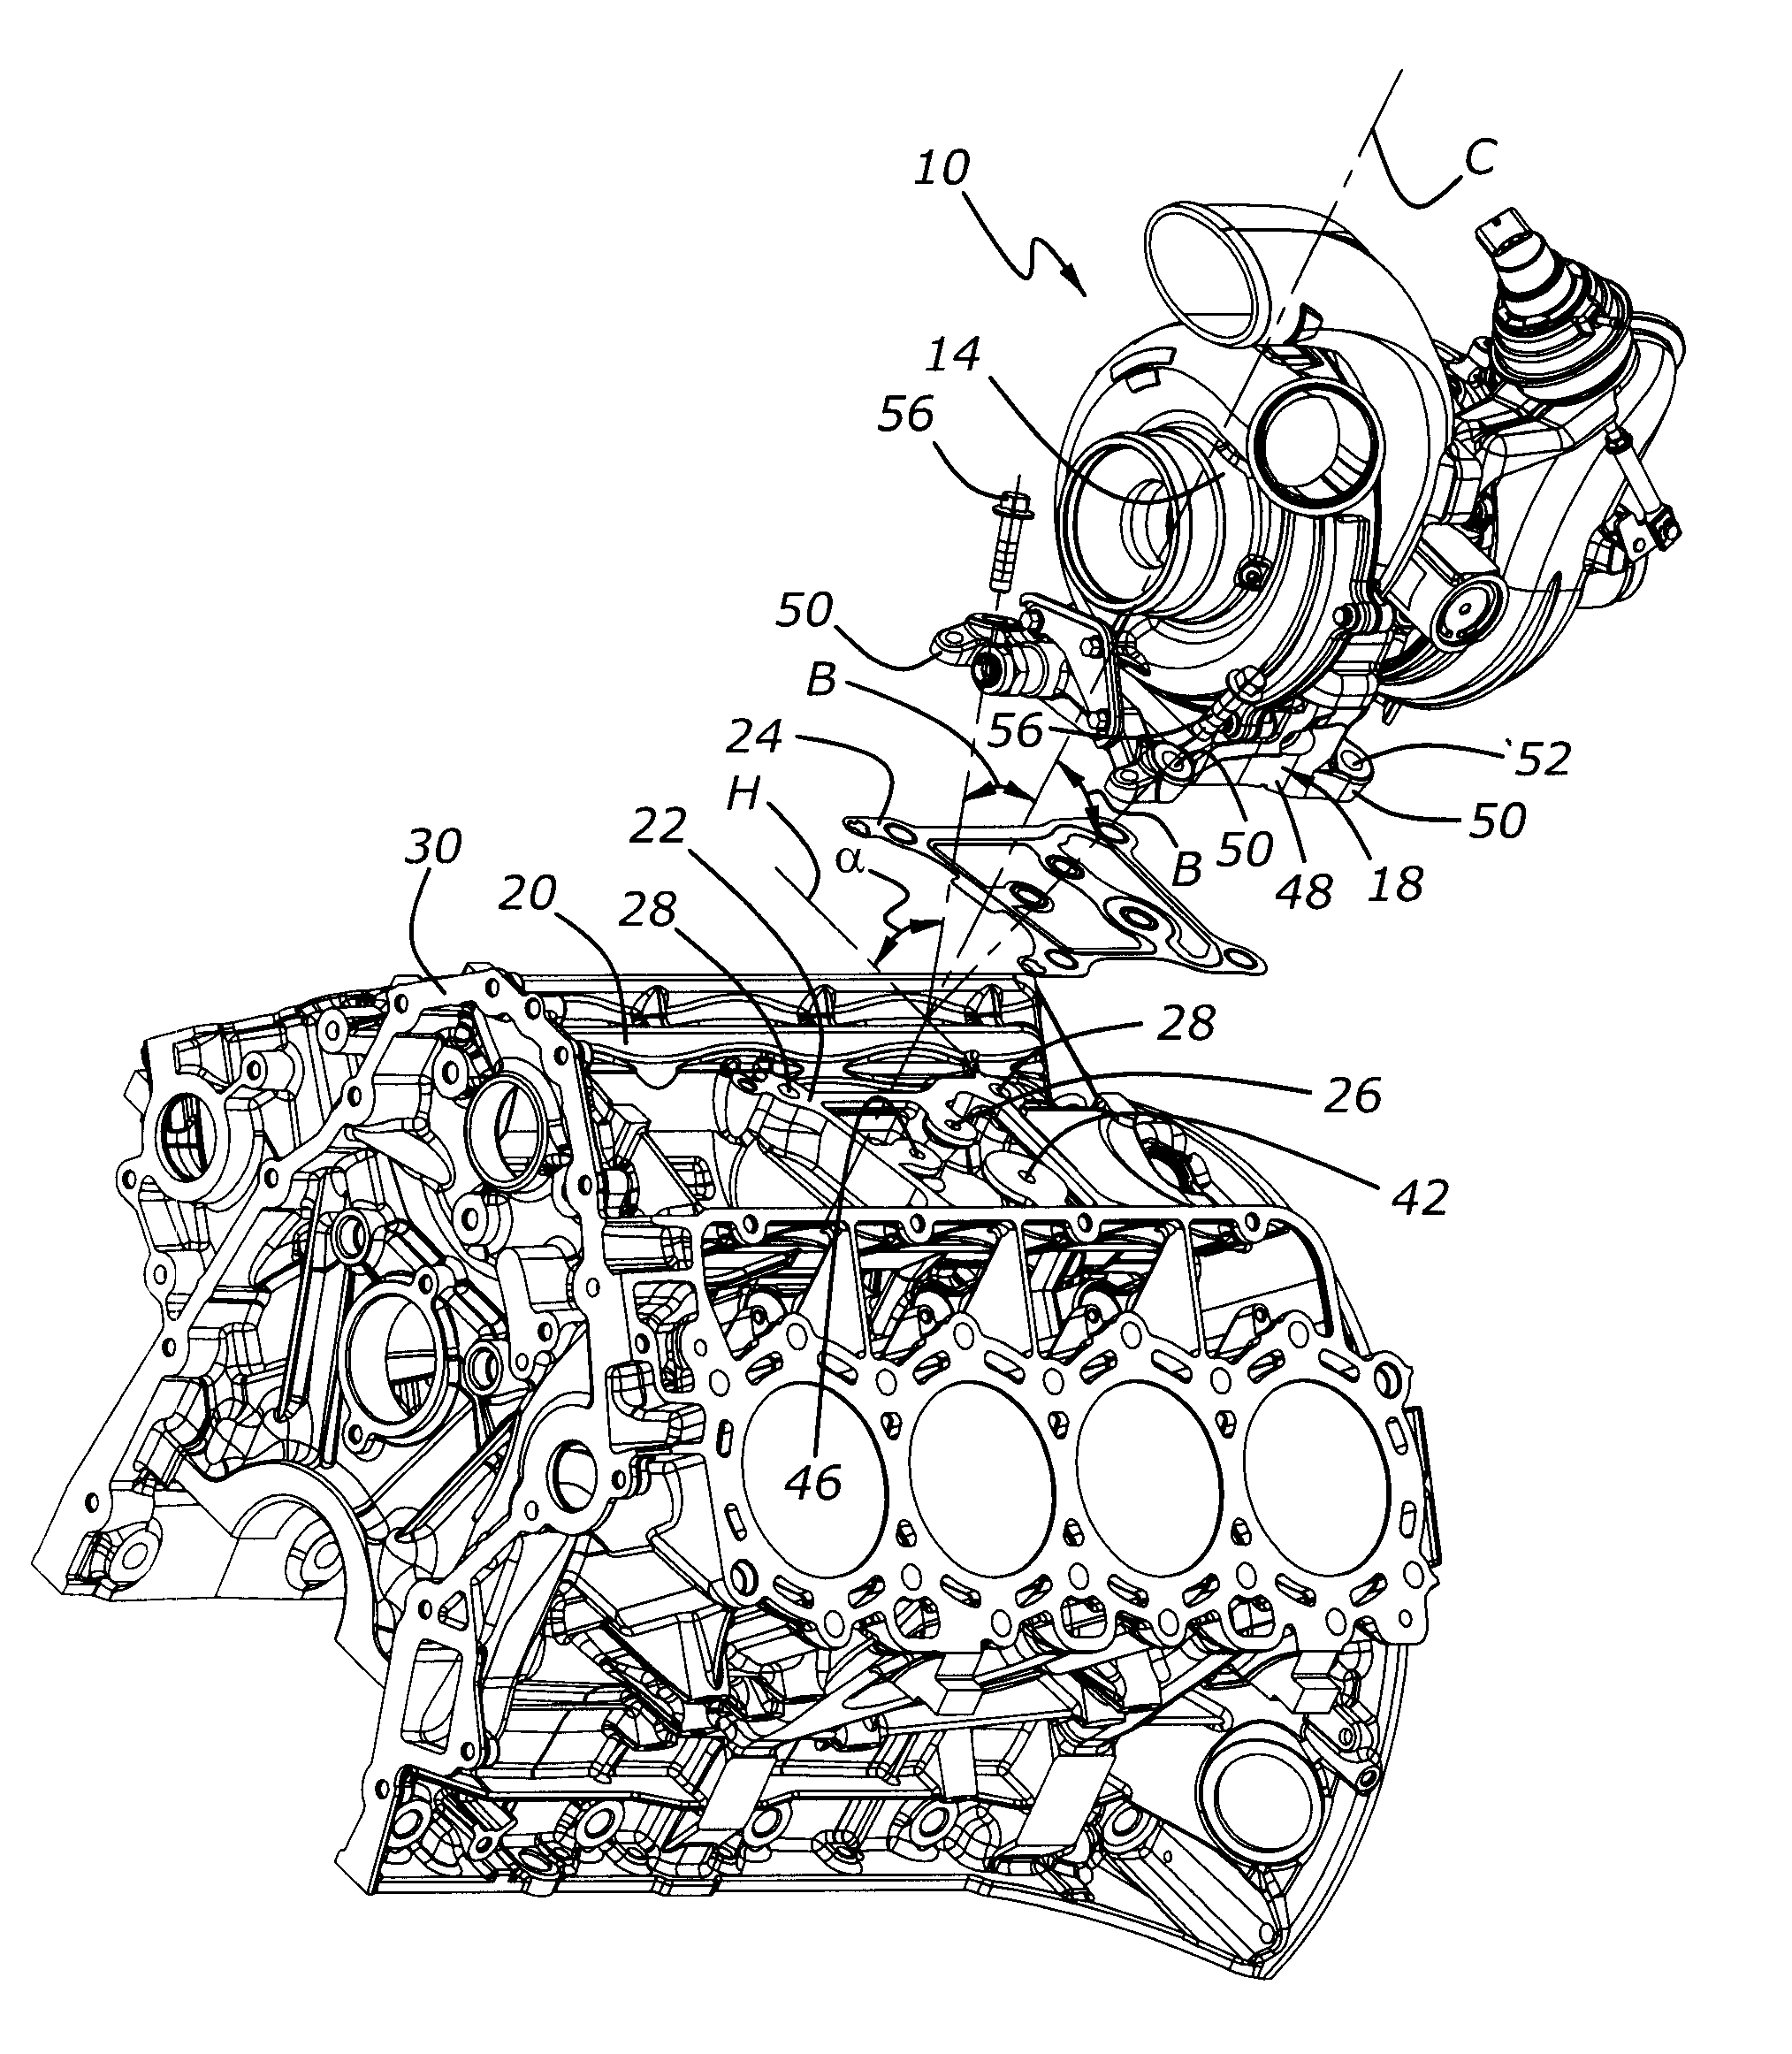 Turbocharger System for Internal Combustion Engine With Internal Isolated Turbocharger Oil Drainback Passage